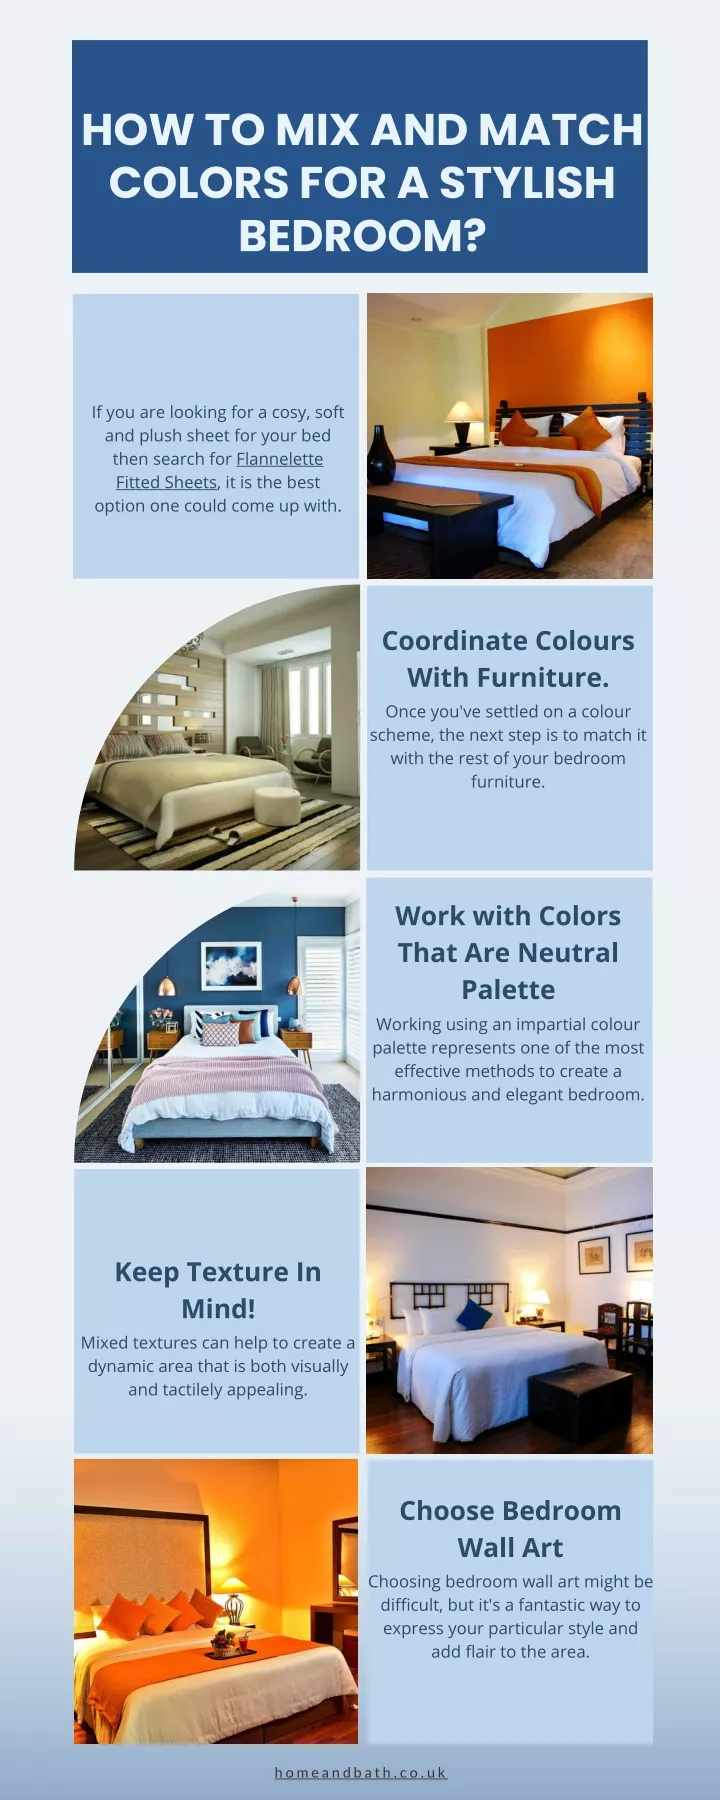 how to mix and match colors for a stylish bedroom